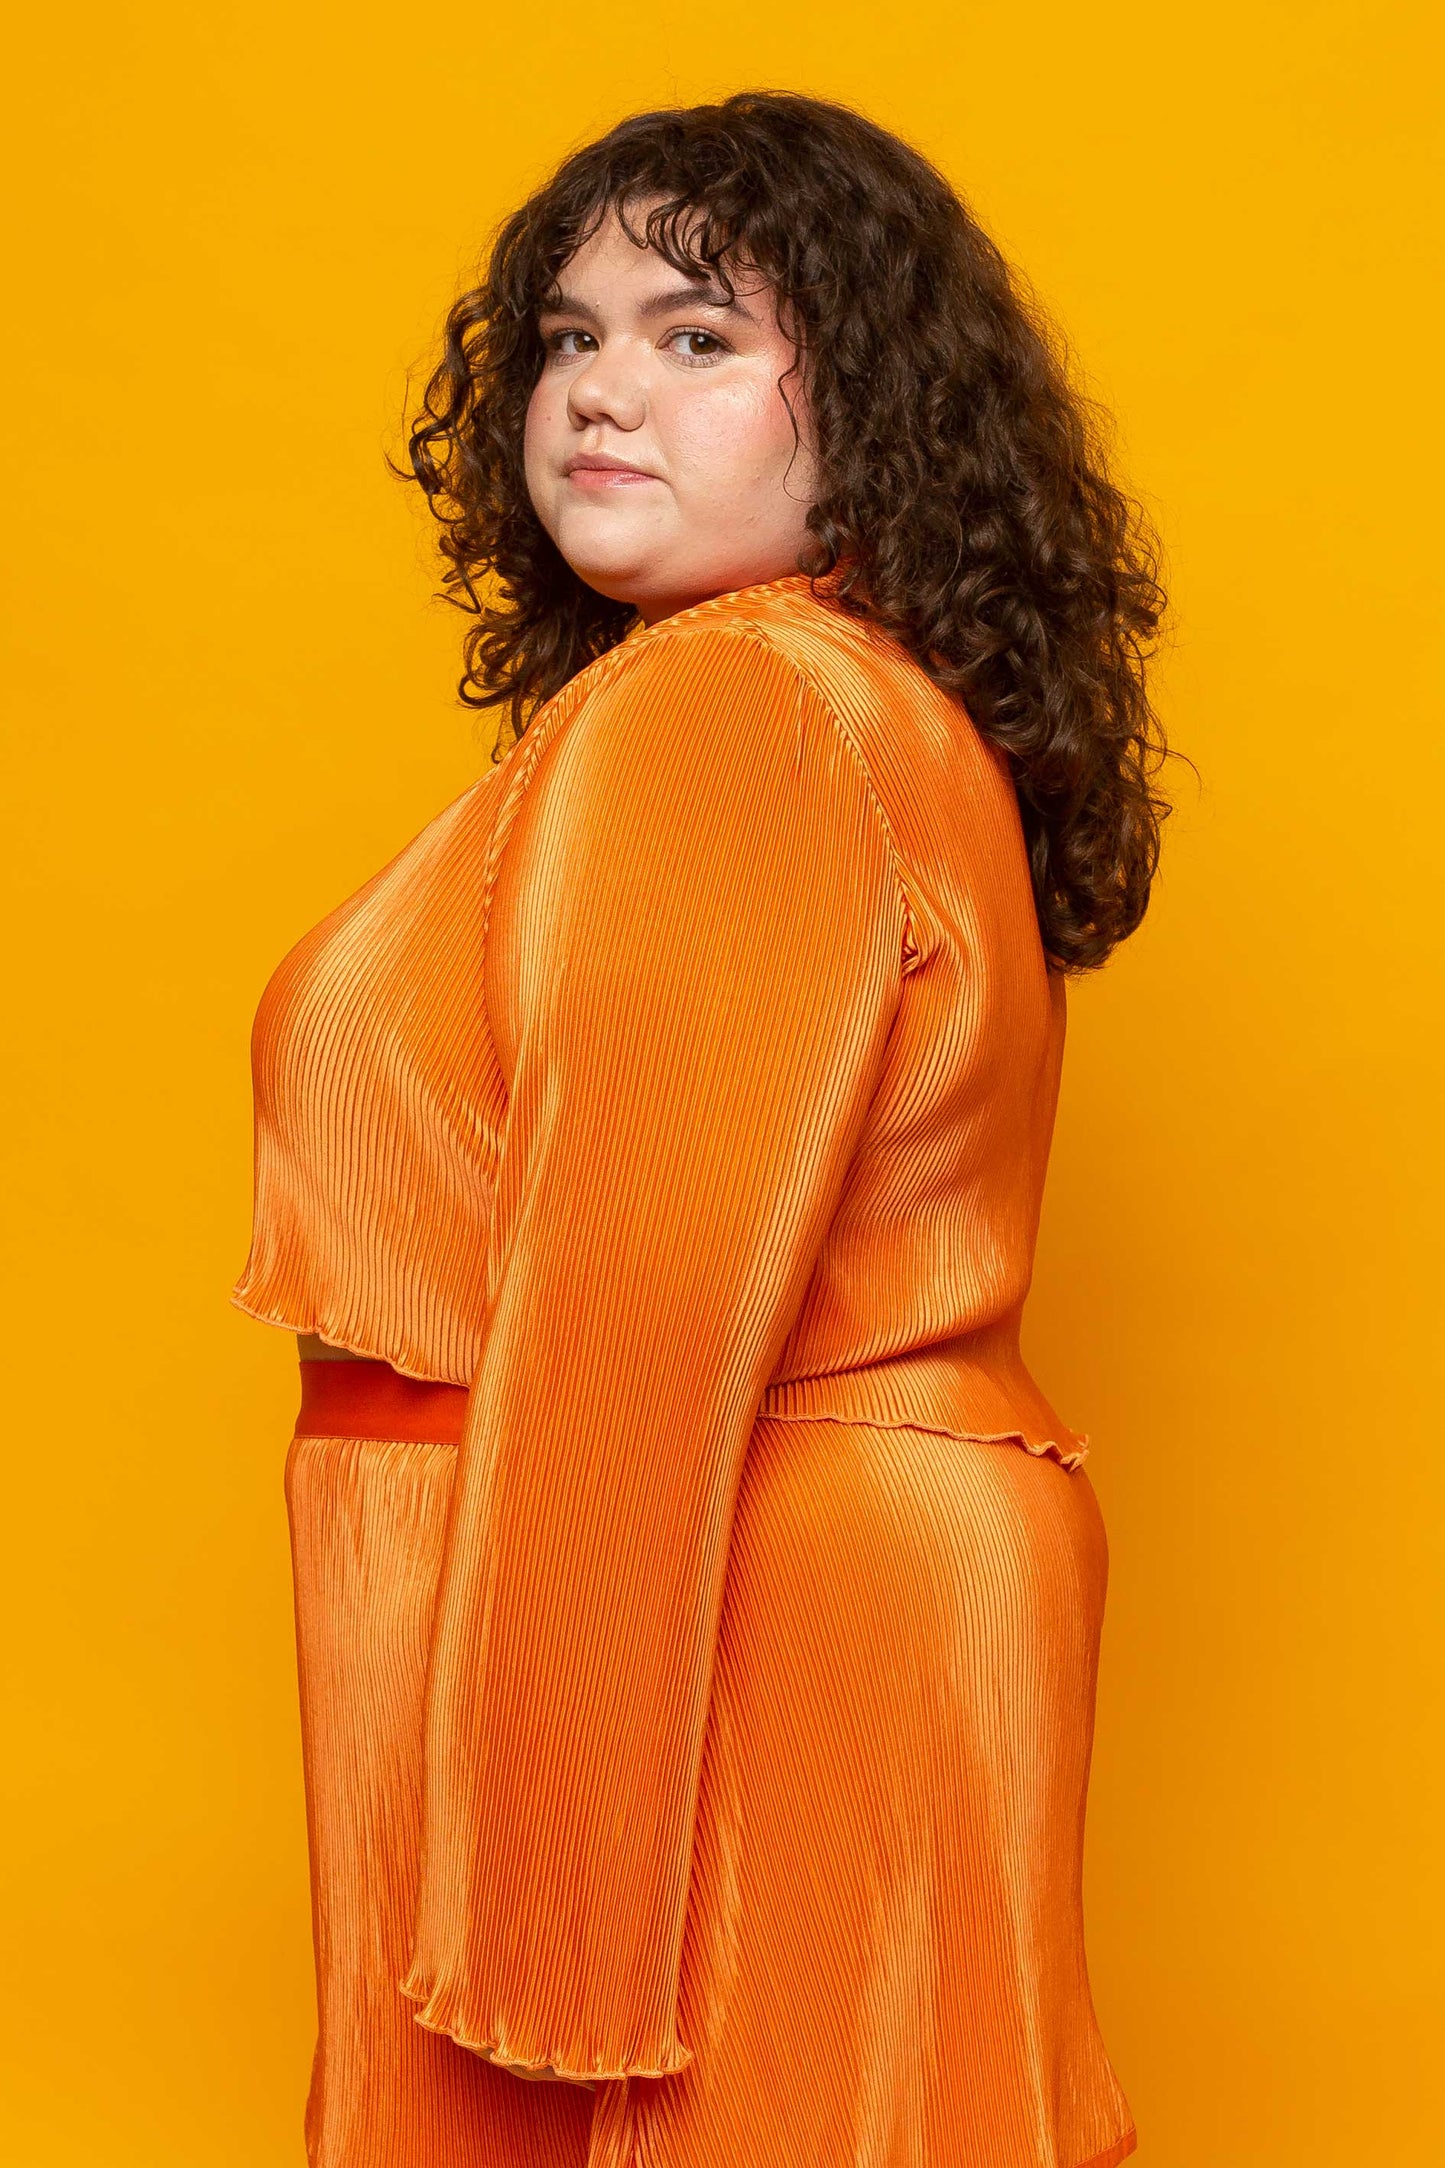 This is The Remix Top I AM THE MAKER OF MY DREAMS - Satin Pleated Round Neck Top In Orange